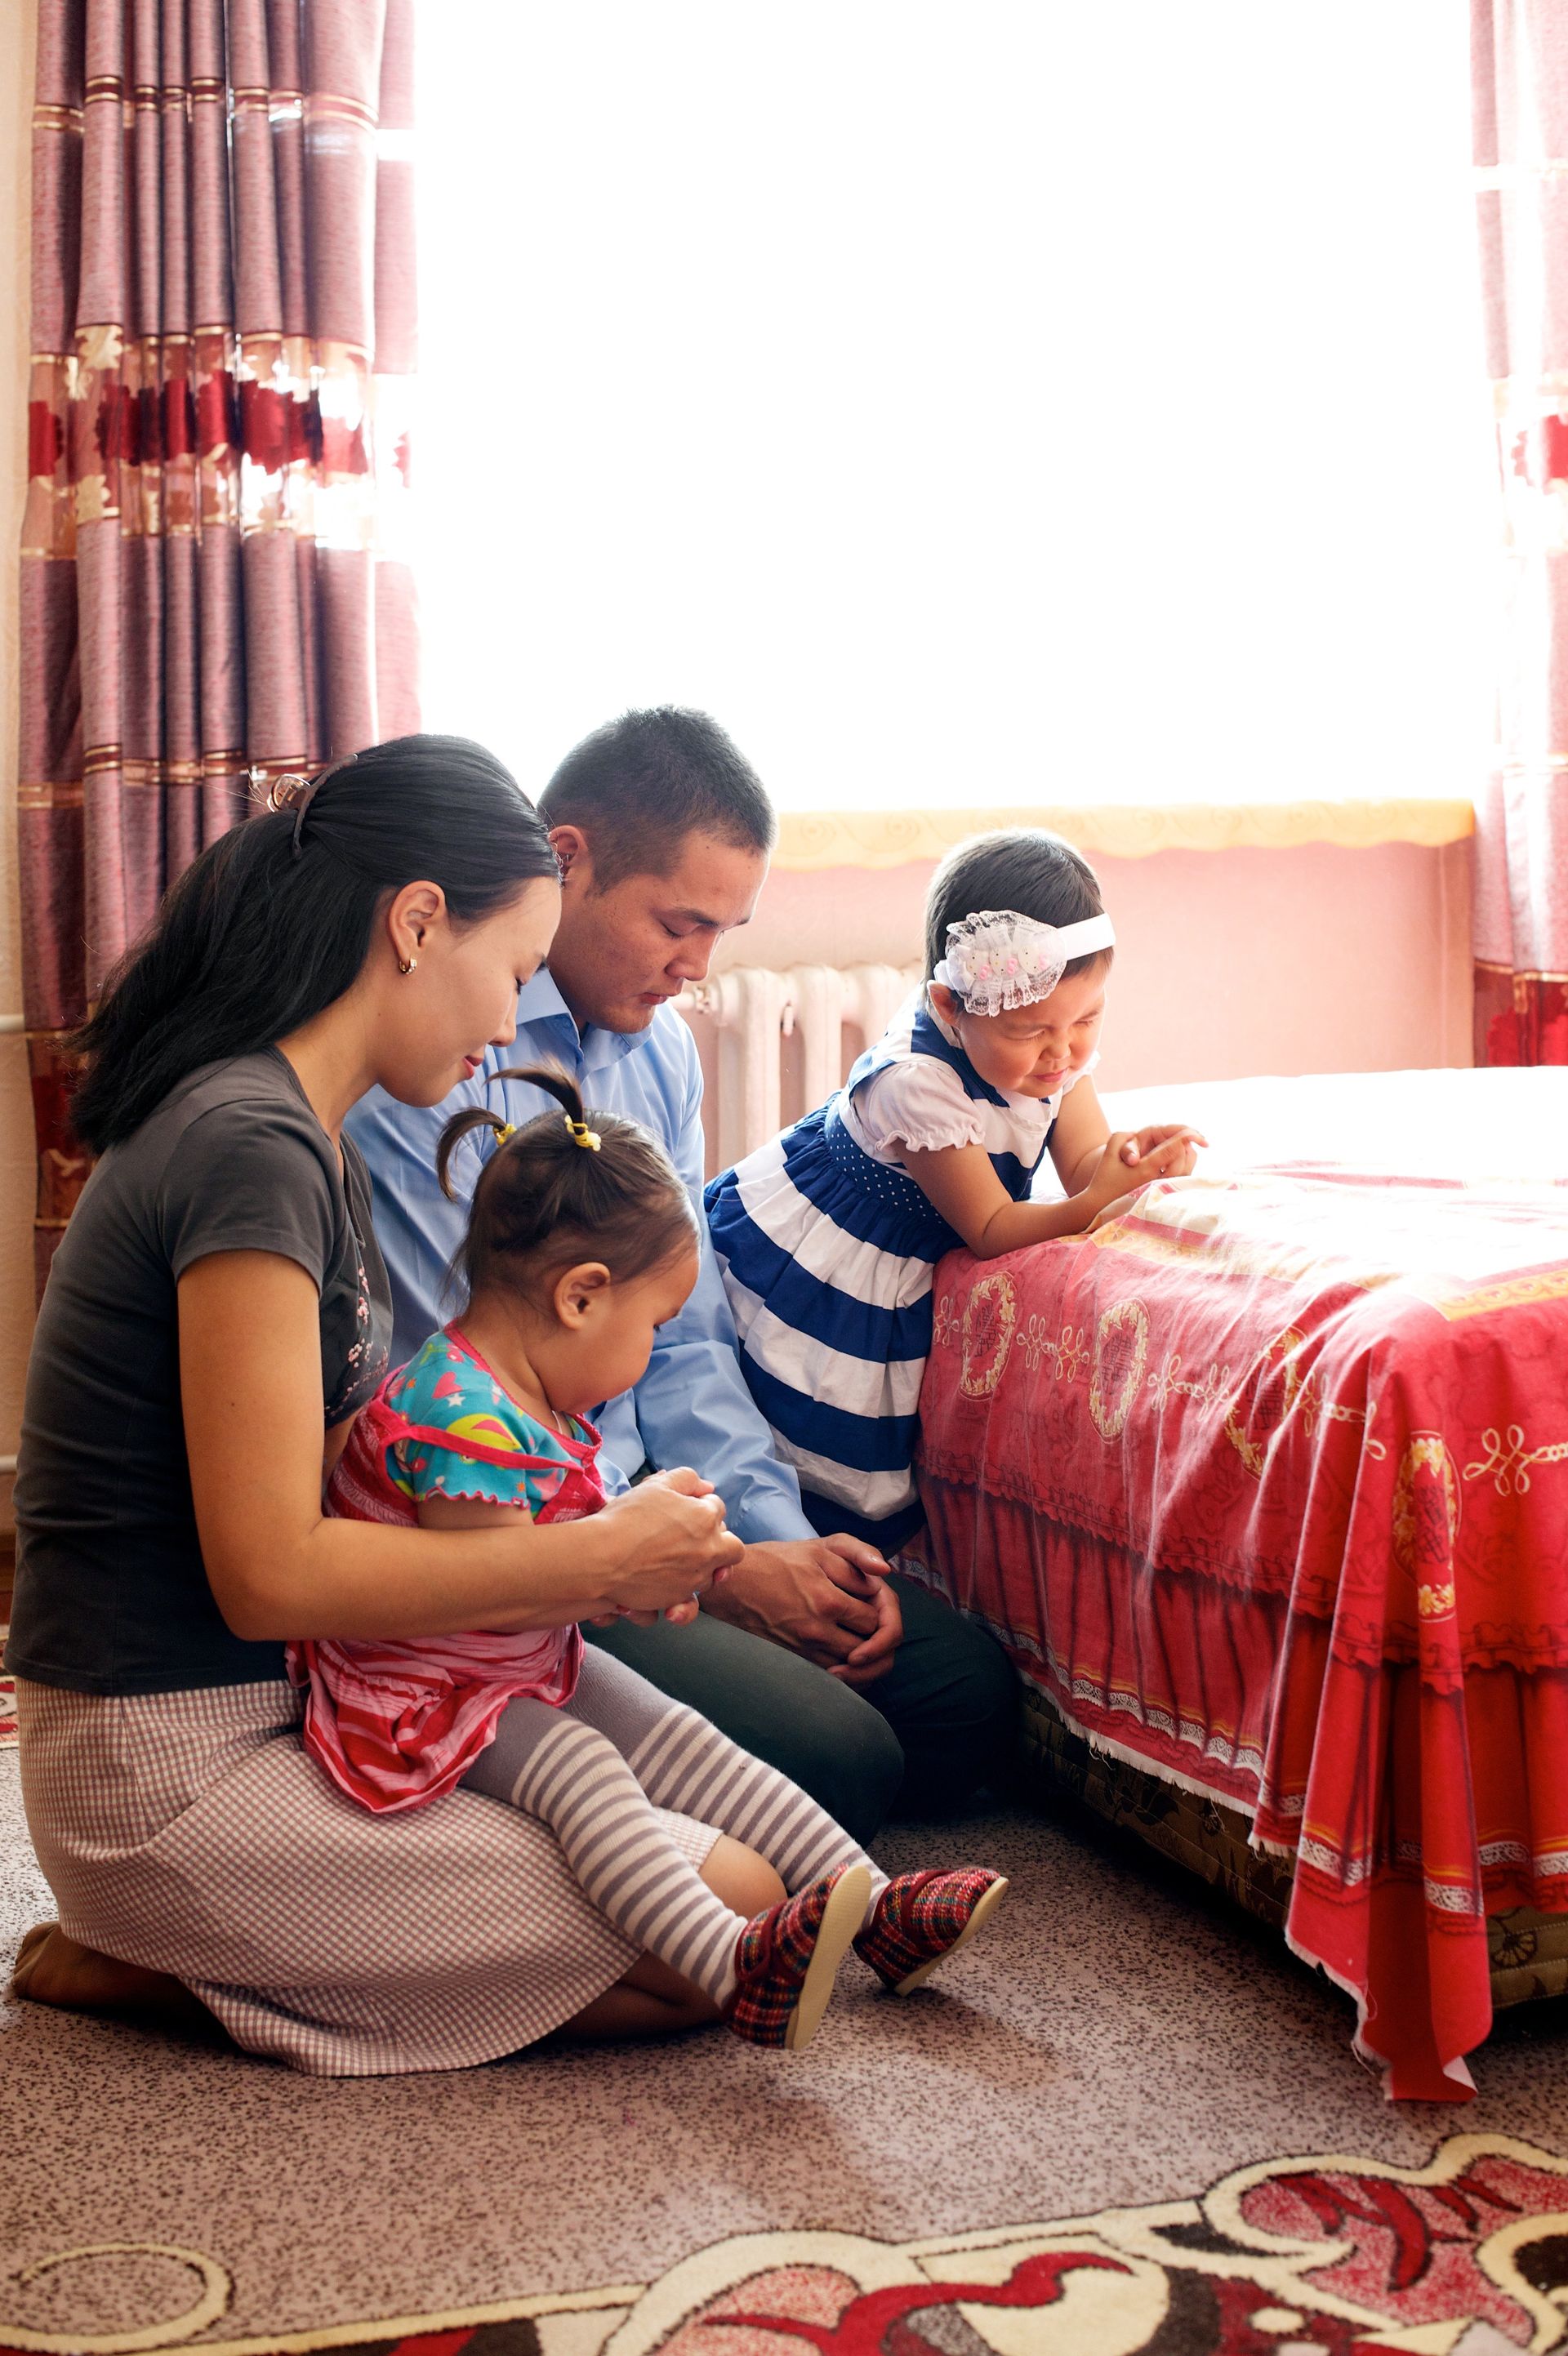 A family kneeling by the bed to pray together.